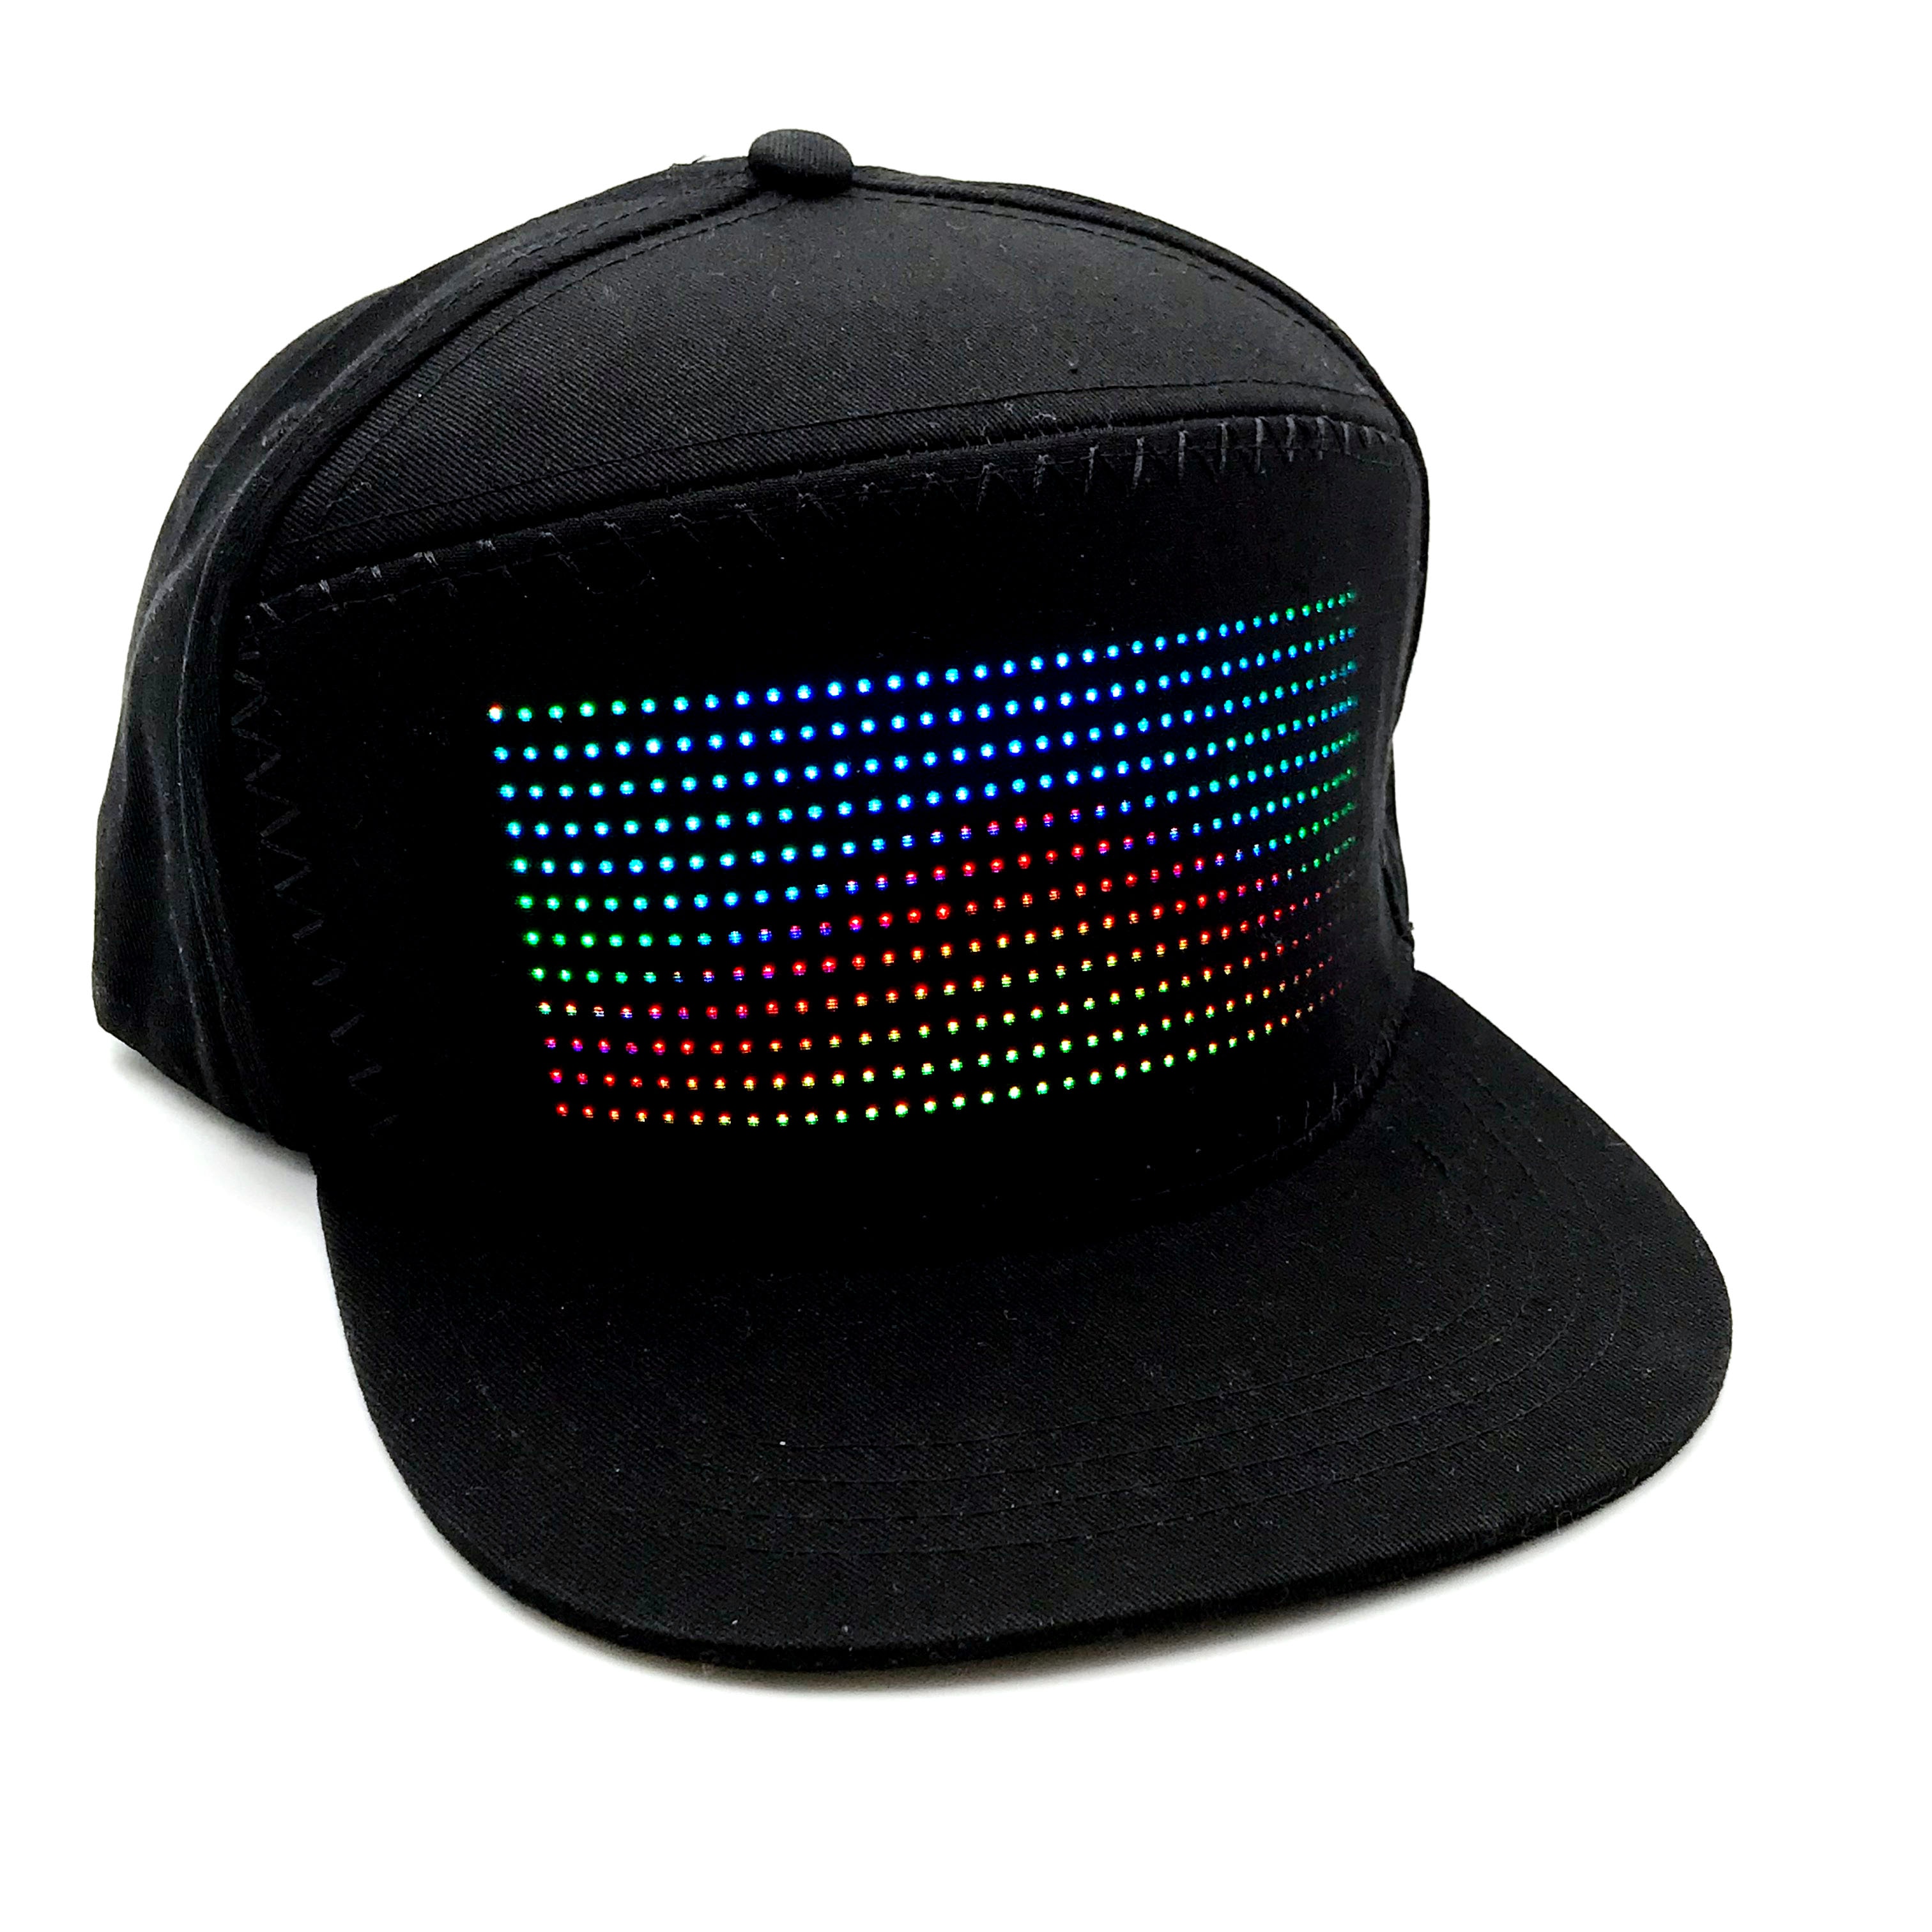 LED Cap, LED Display Screen Smart Hat Bluetooth Adjustable Cool Hat for Party Club